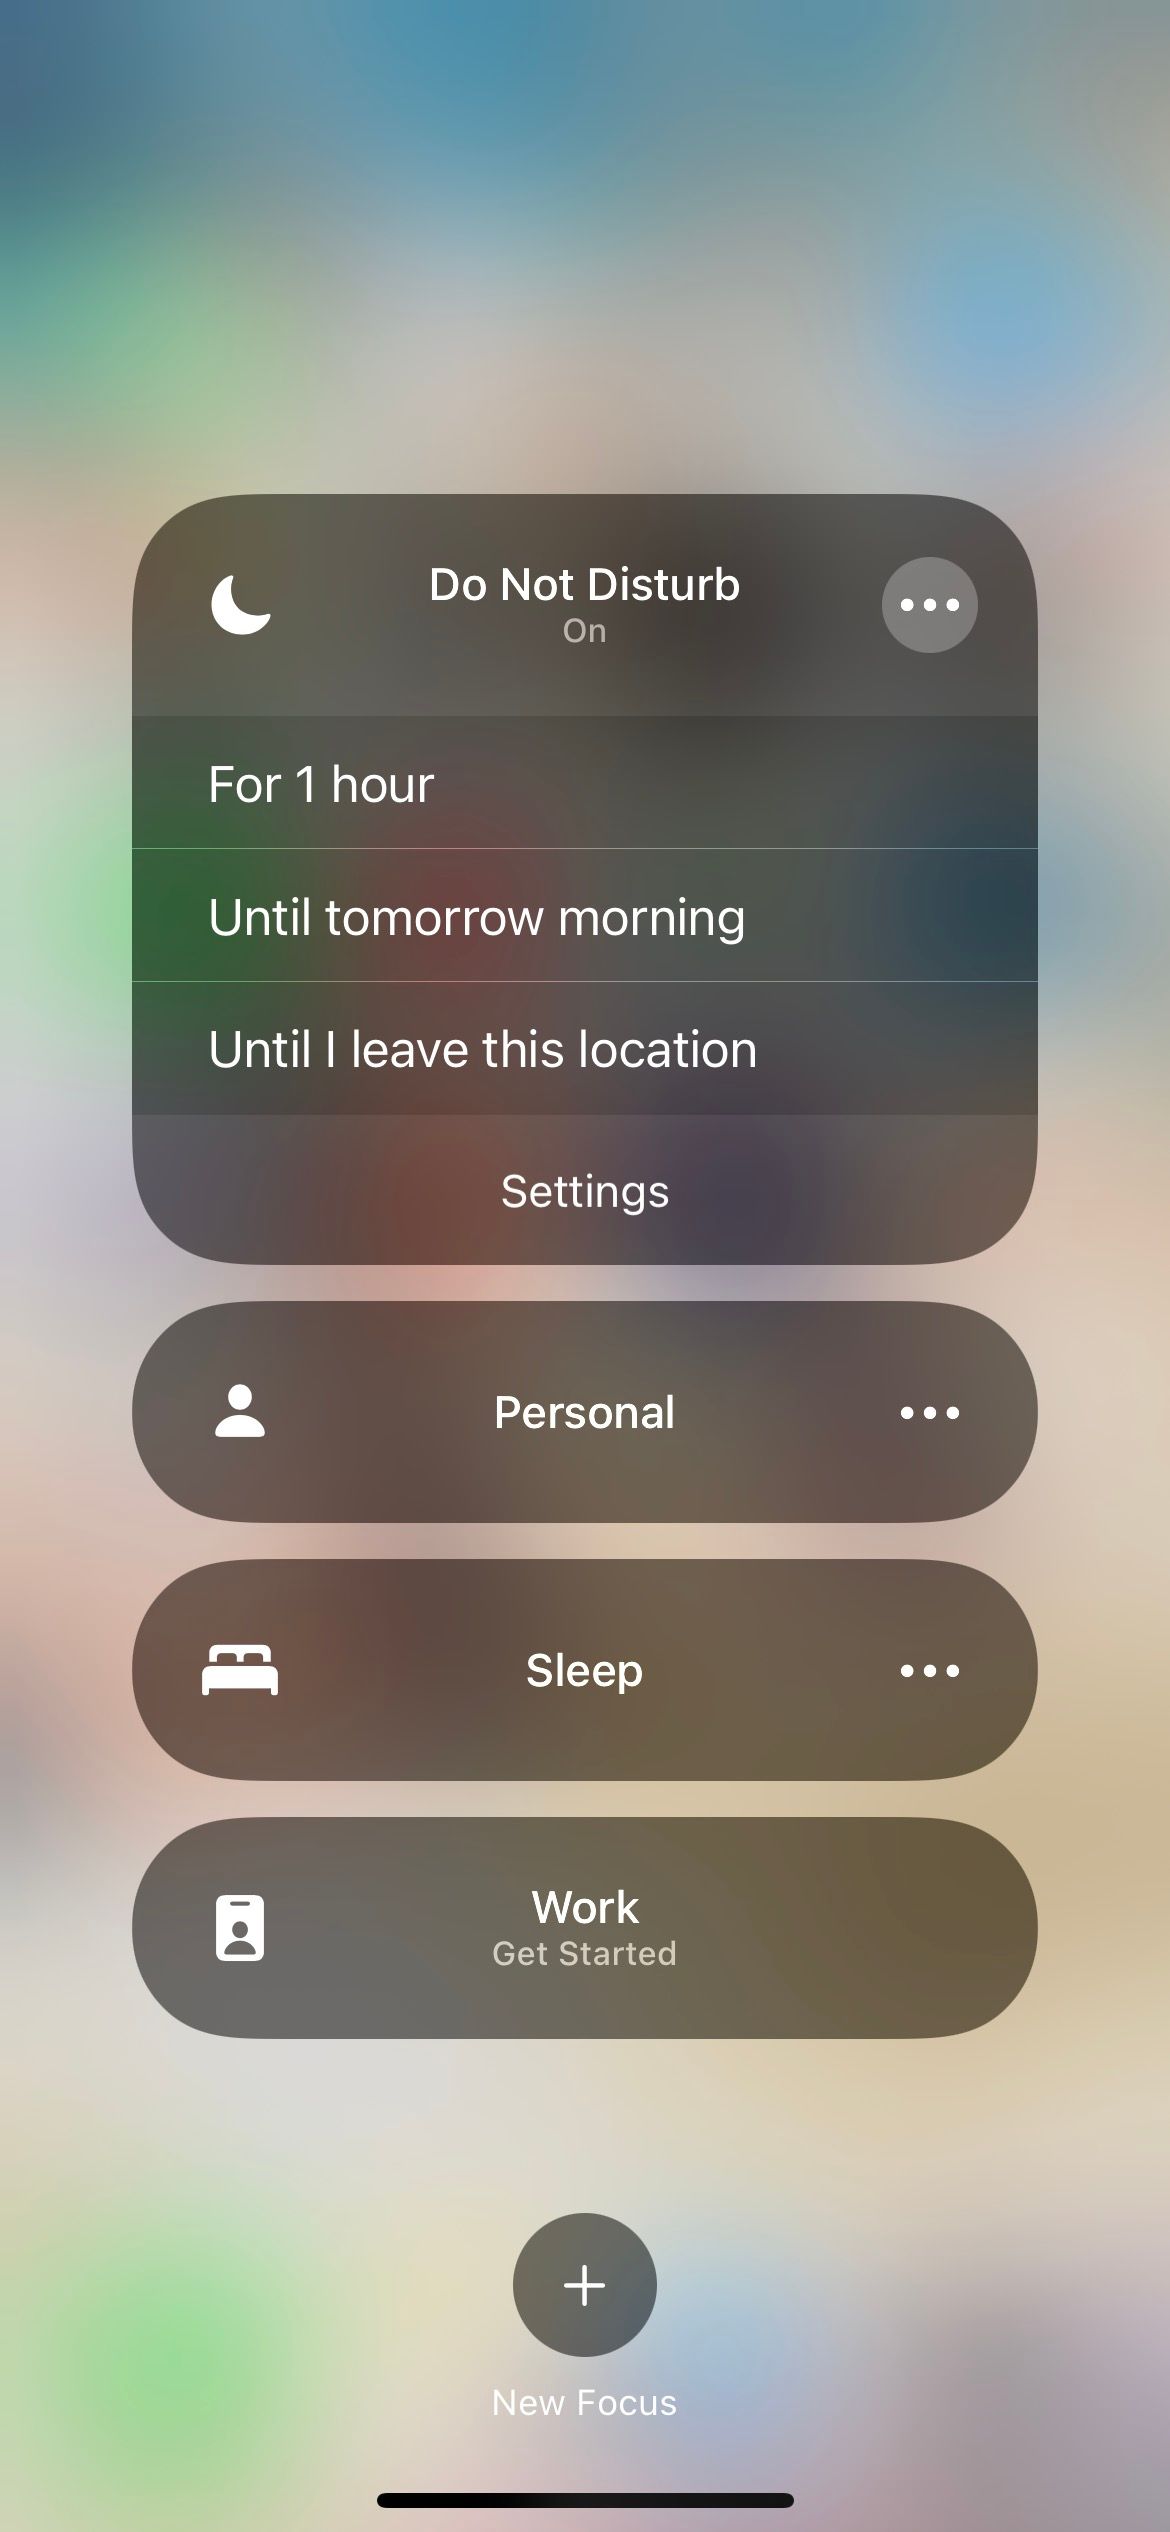 do not disturb settings in iphone control center